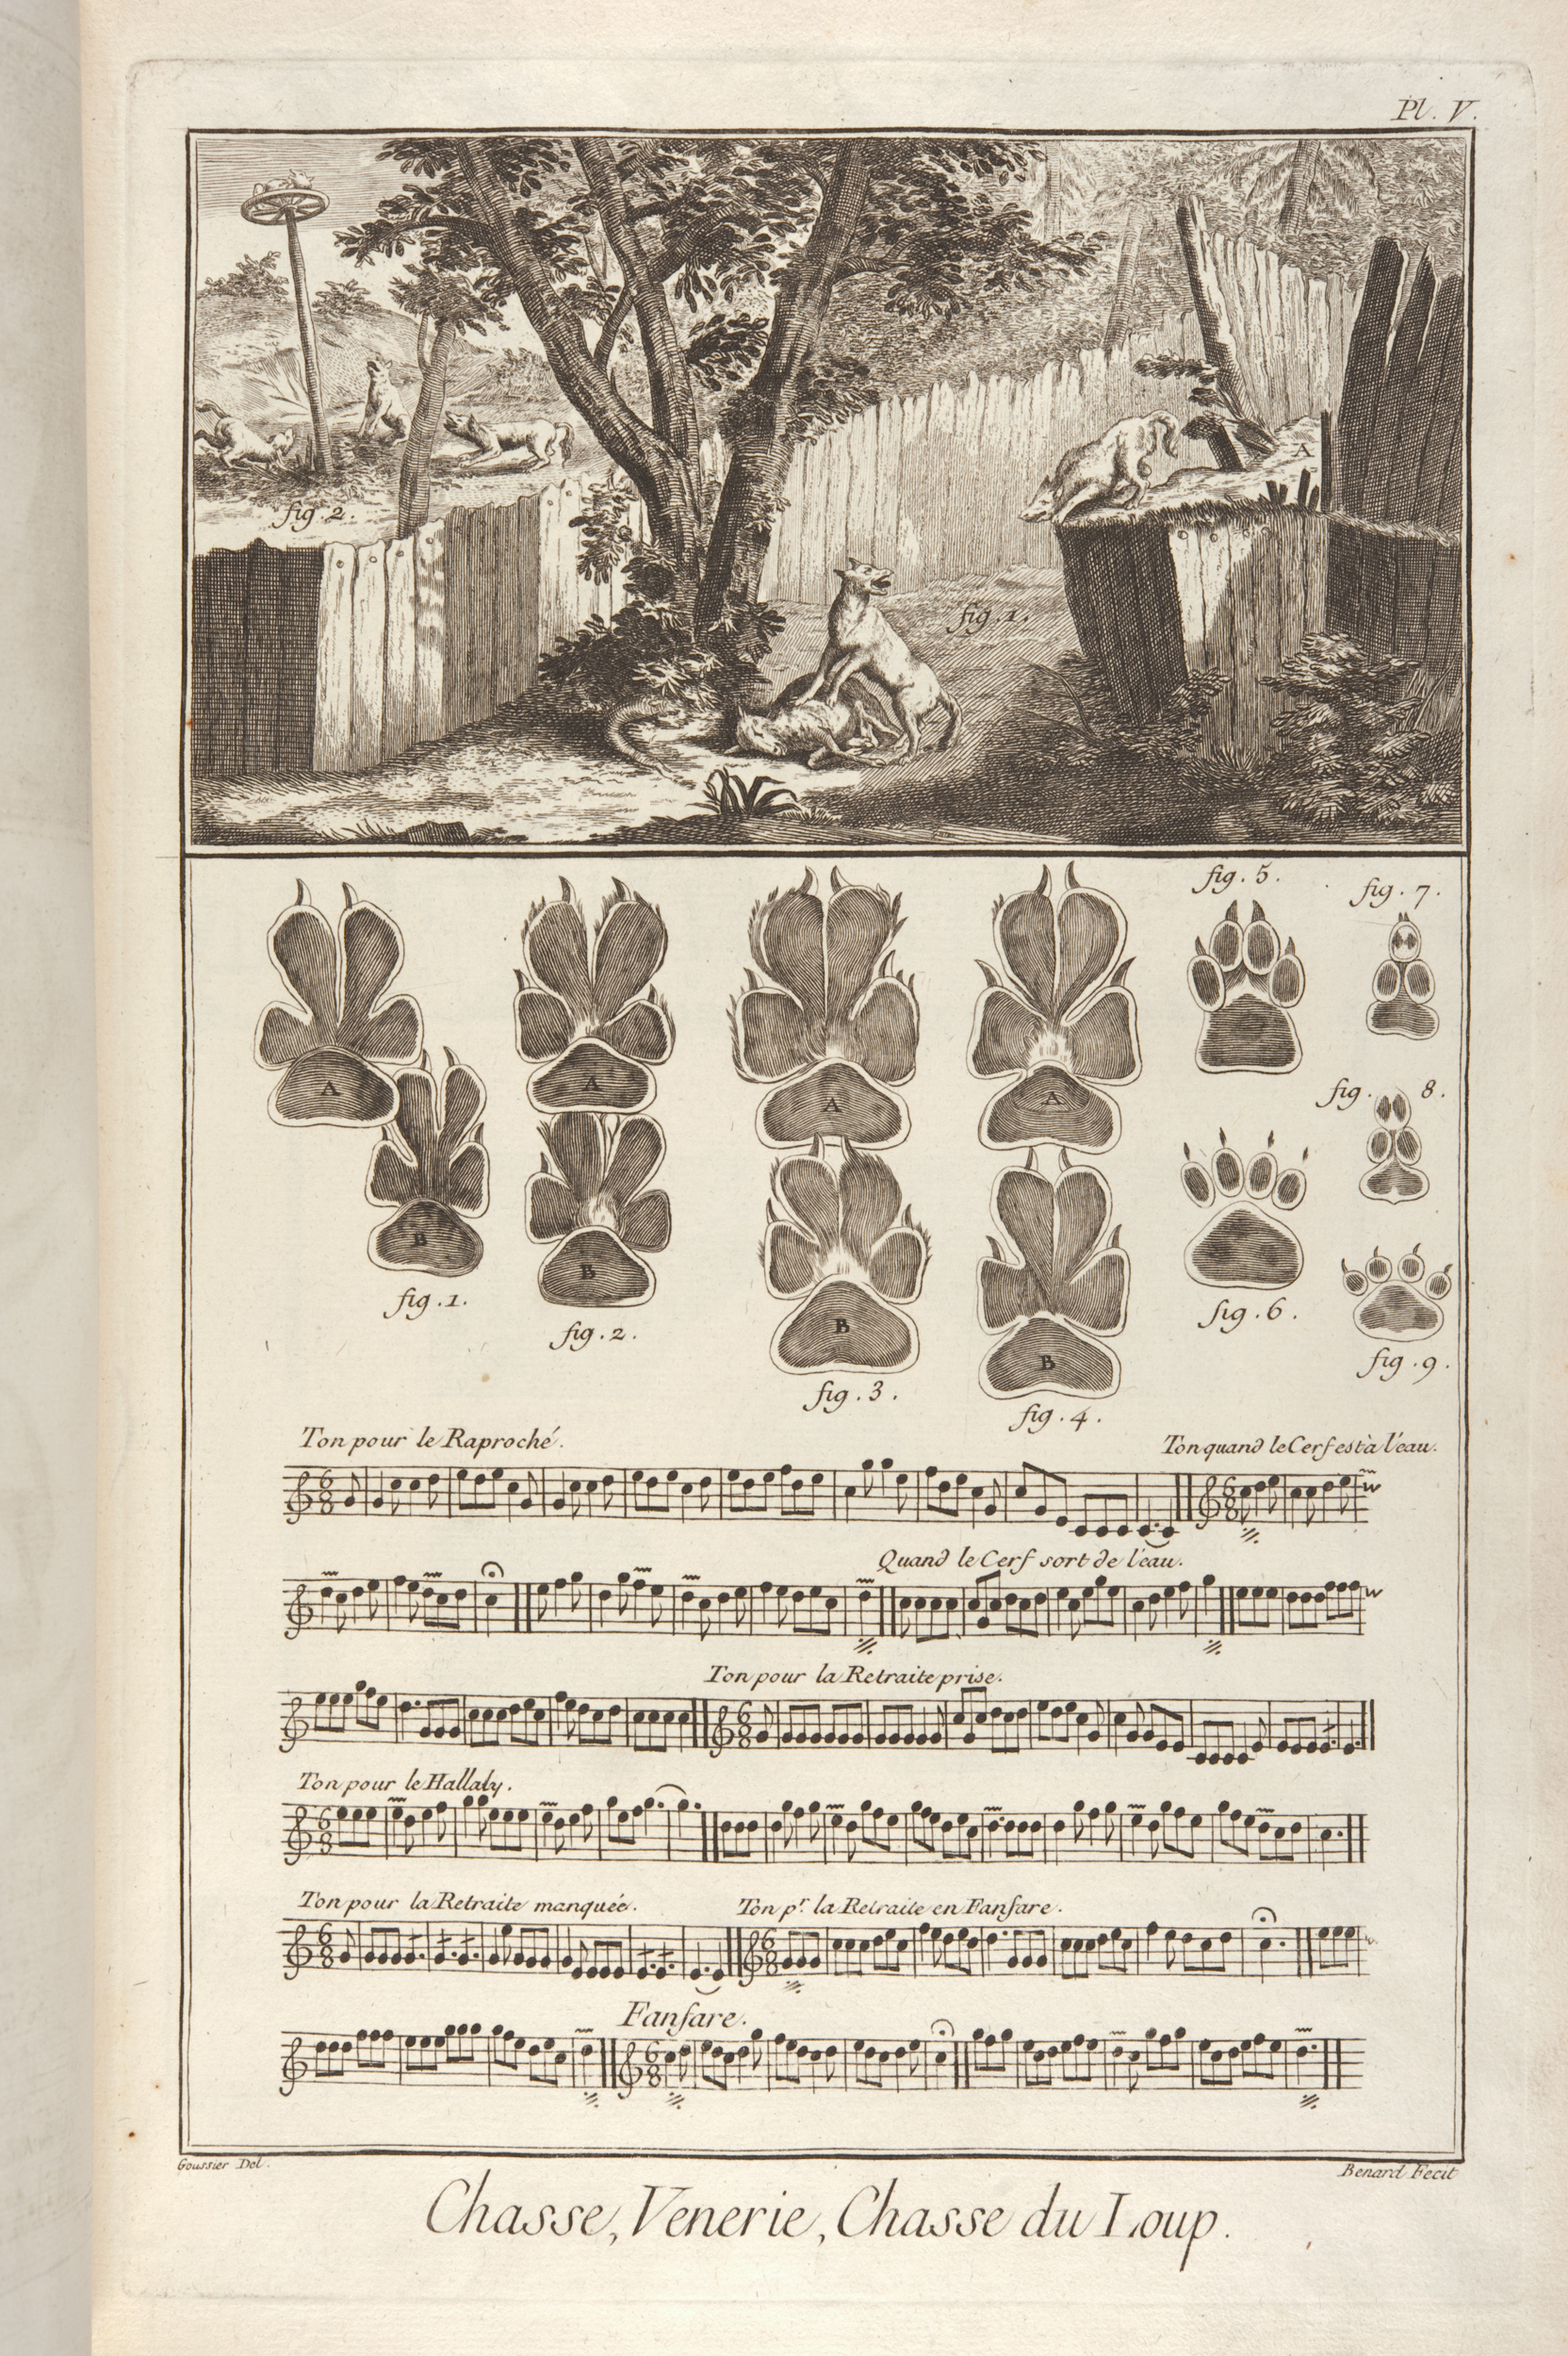 Plate with the musical score for "Chasse du Loup" from Diderot & d’Alembert’s Encyclopédie (St Andrews copy at =sf AE25.D5)